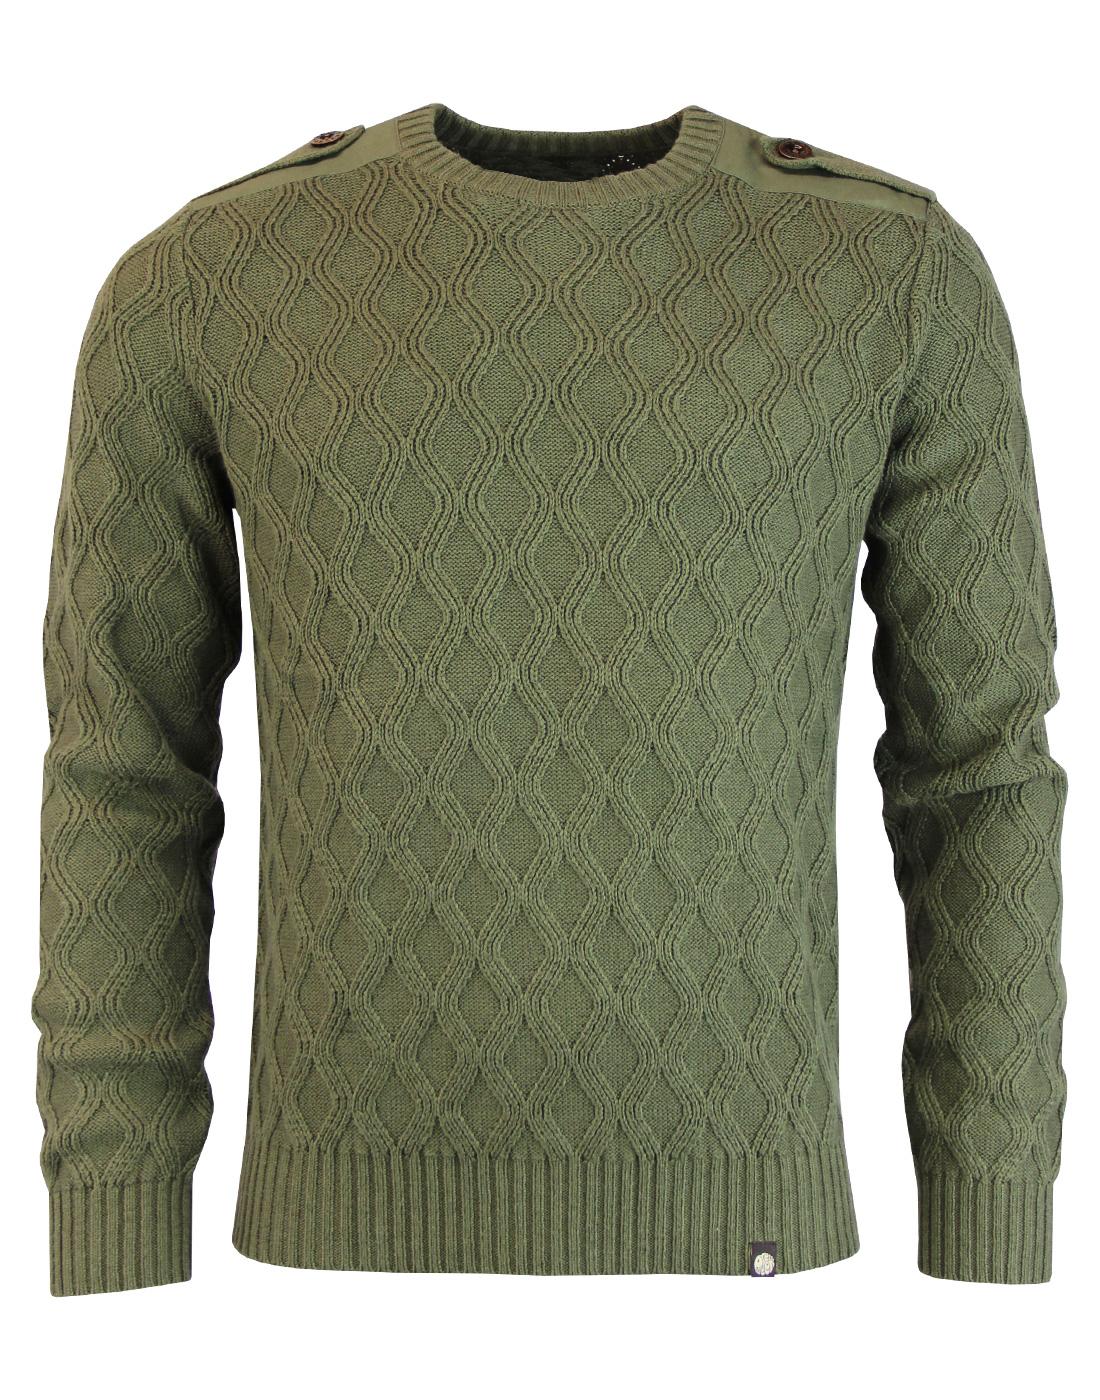 Hertford PRETTY GREEN Mod Cable Knit Army Jumper